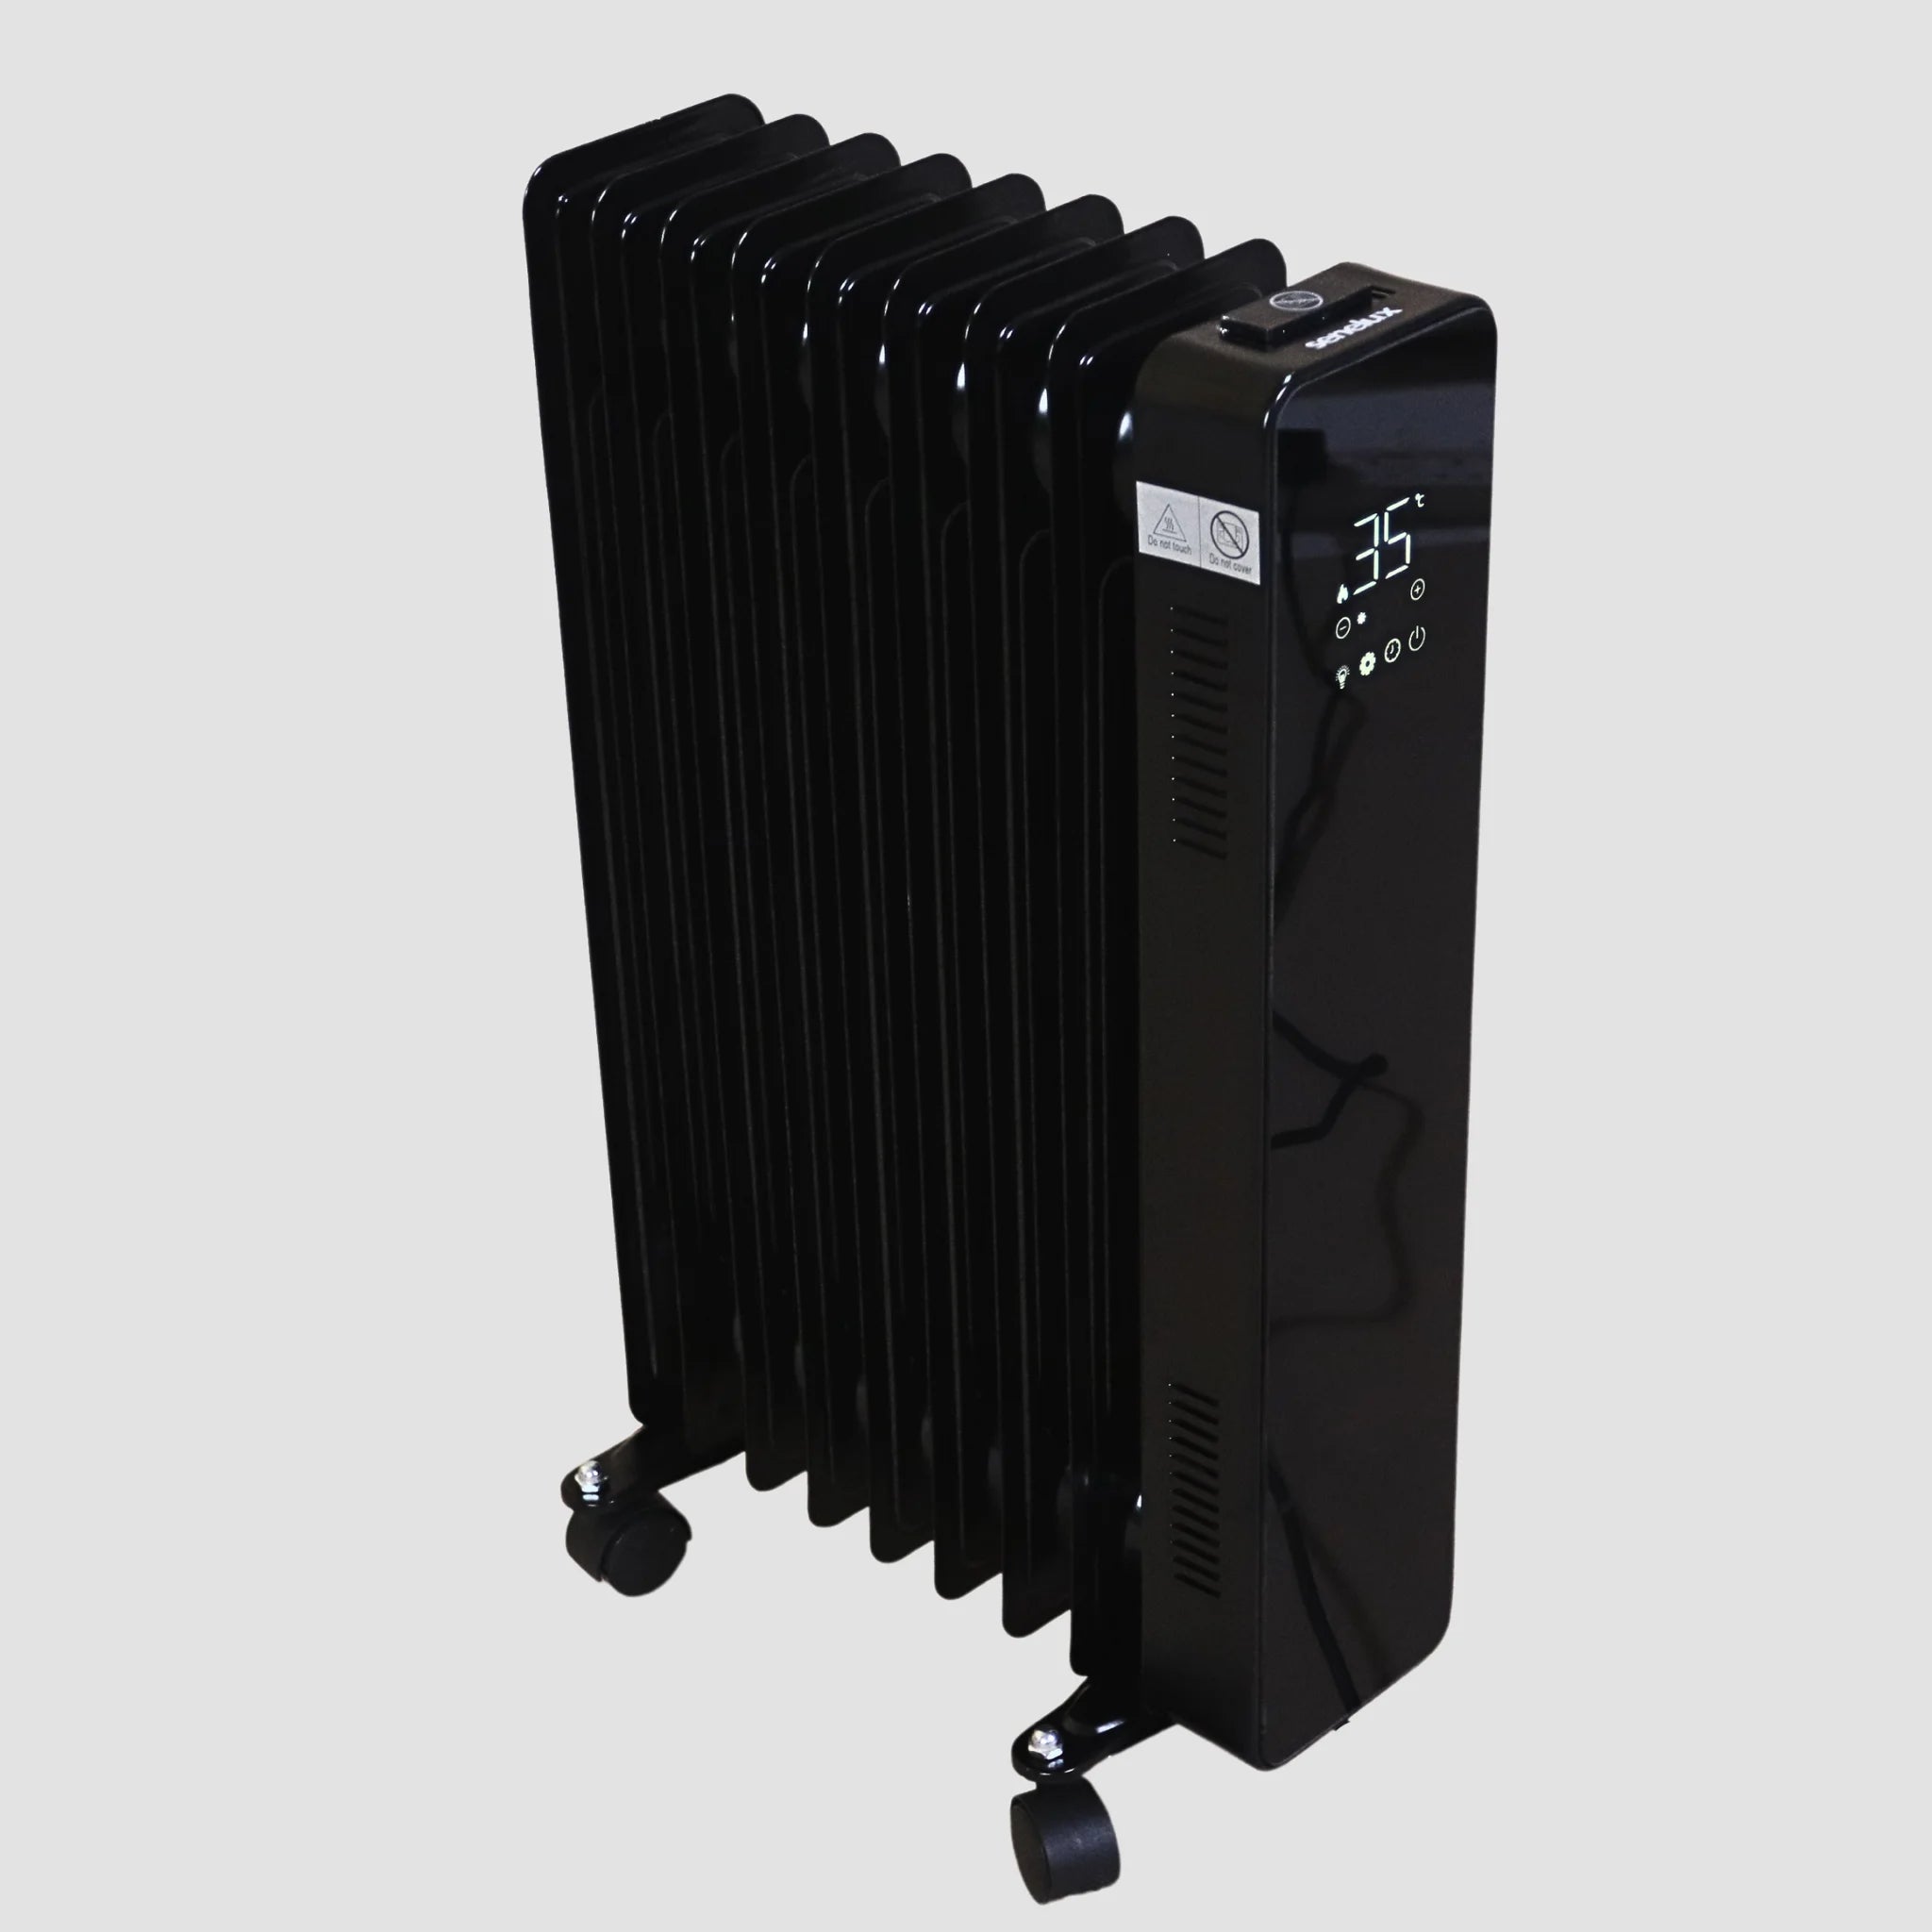 A picture of the Senelux Oil Filled Heater from a top down angle